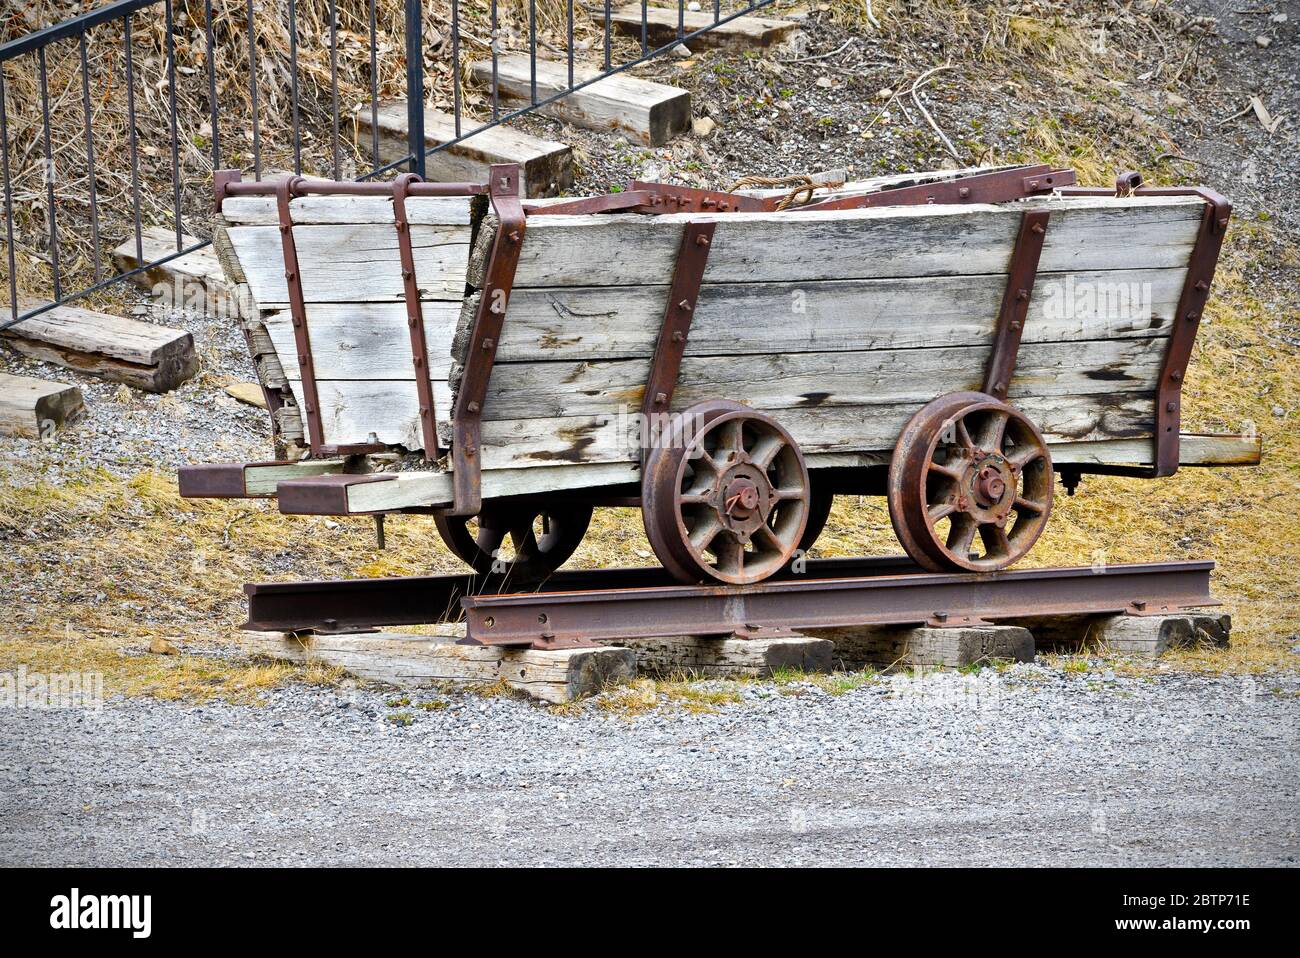 A mining cart from the early 1900's riding on rails built to remove ore from the coal mine shaft in Cadomin Alberta Canada Stock Photo